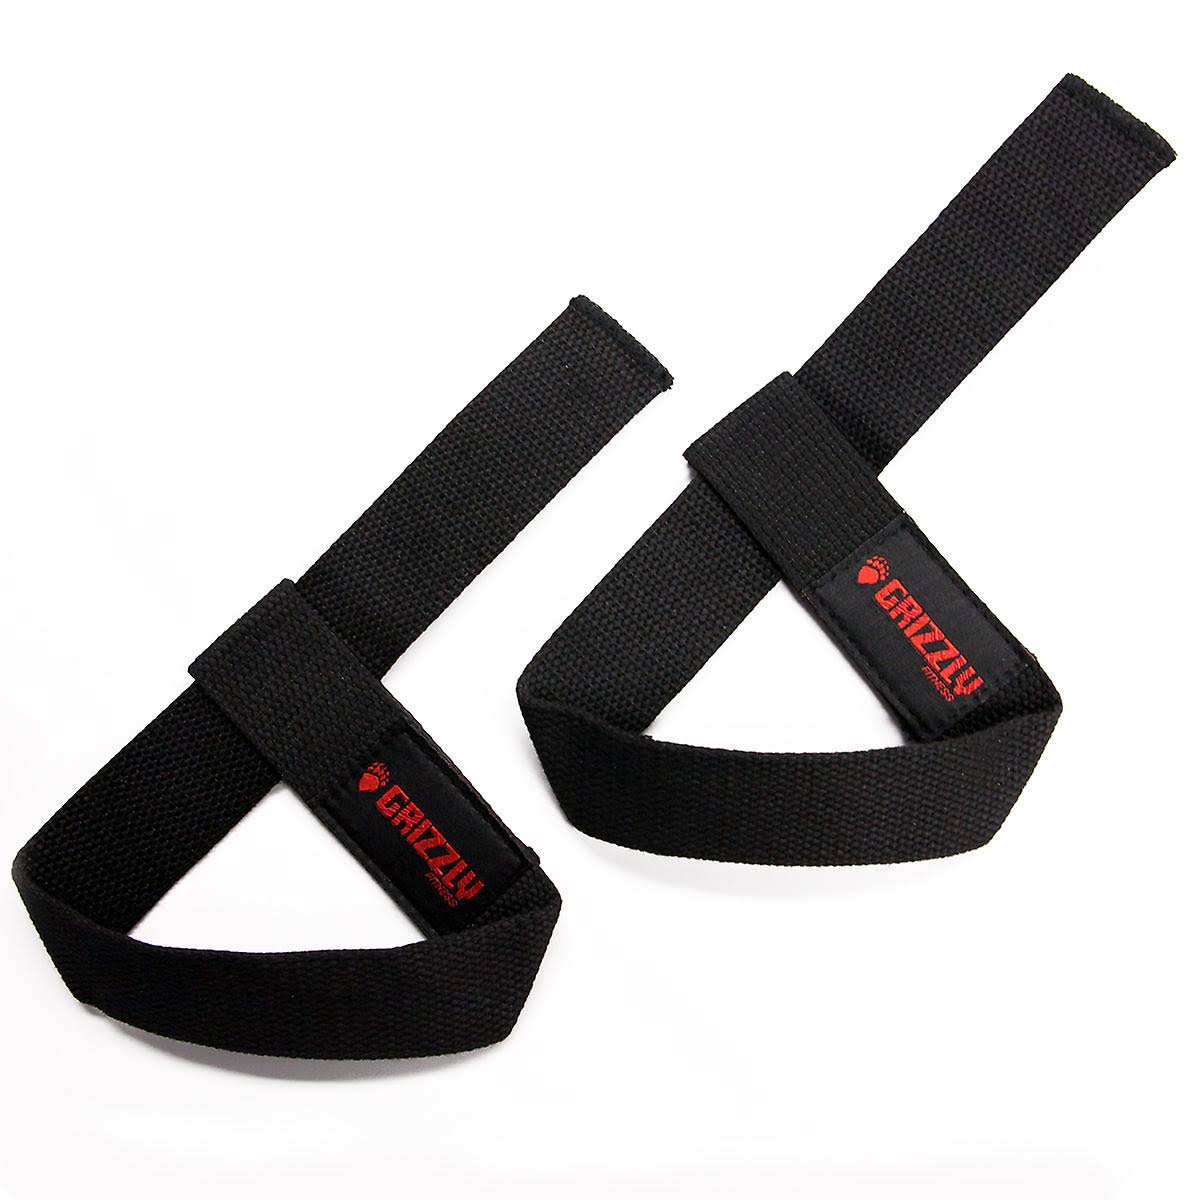 Grizzly Fitness Cotton Weight Lifting Straps - Black, 1.5"